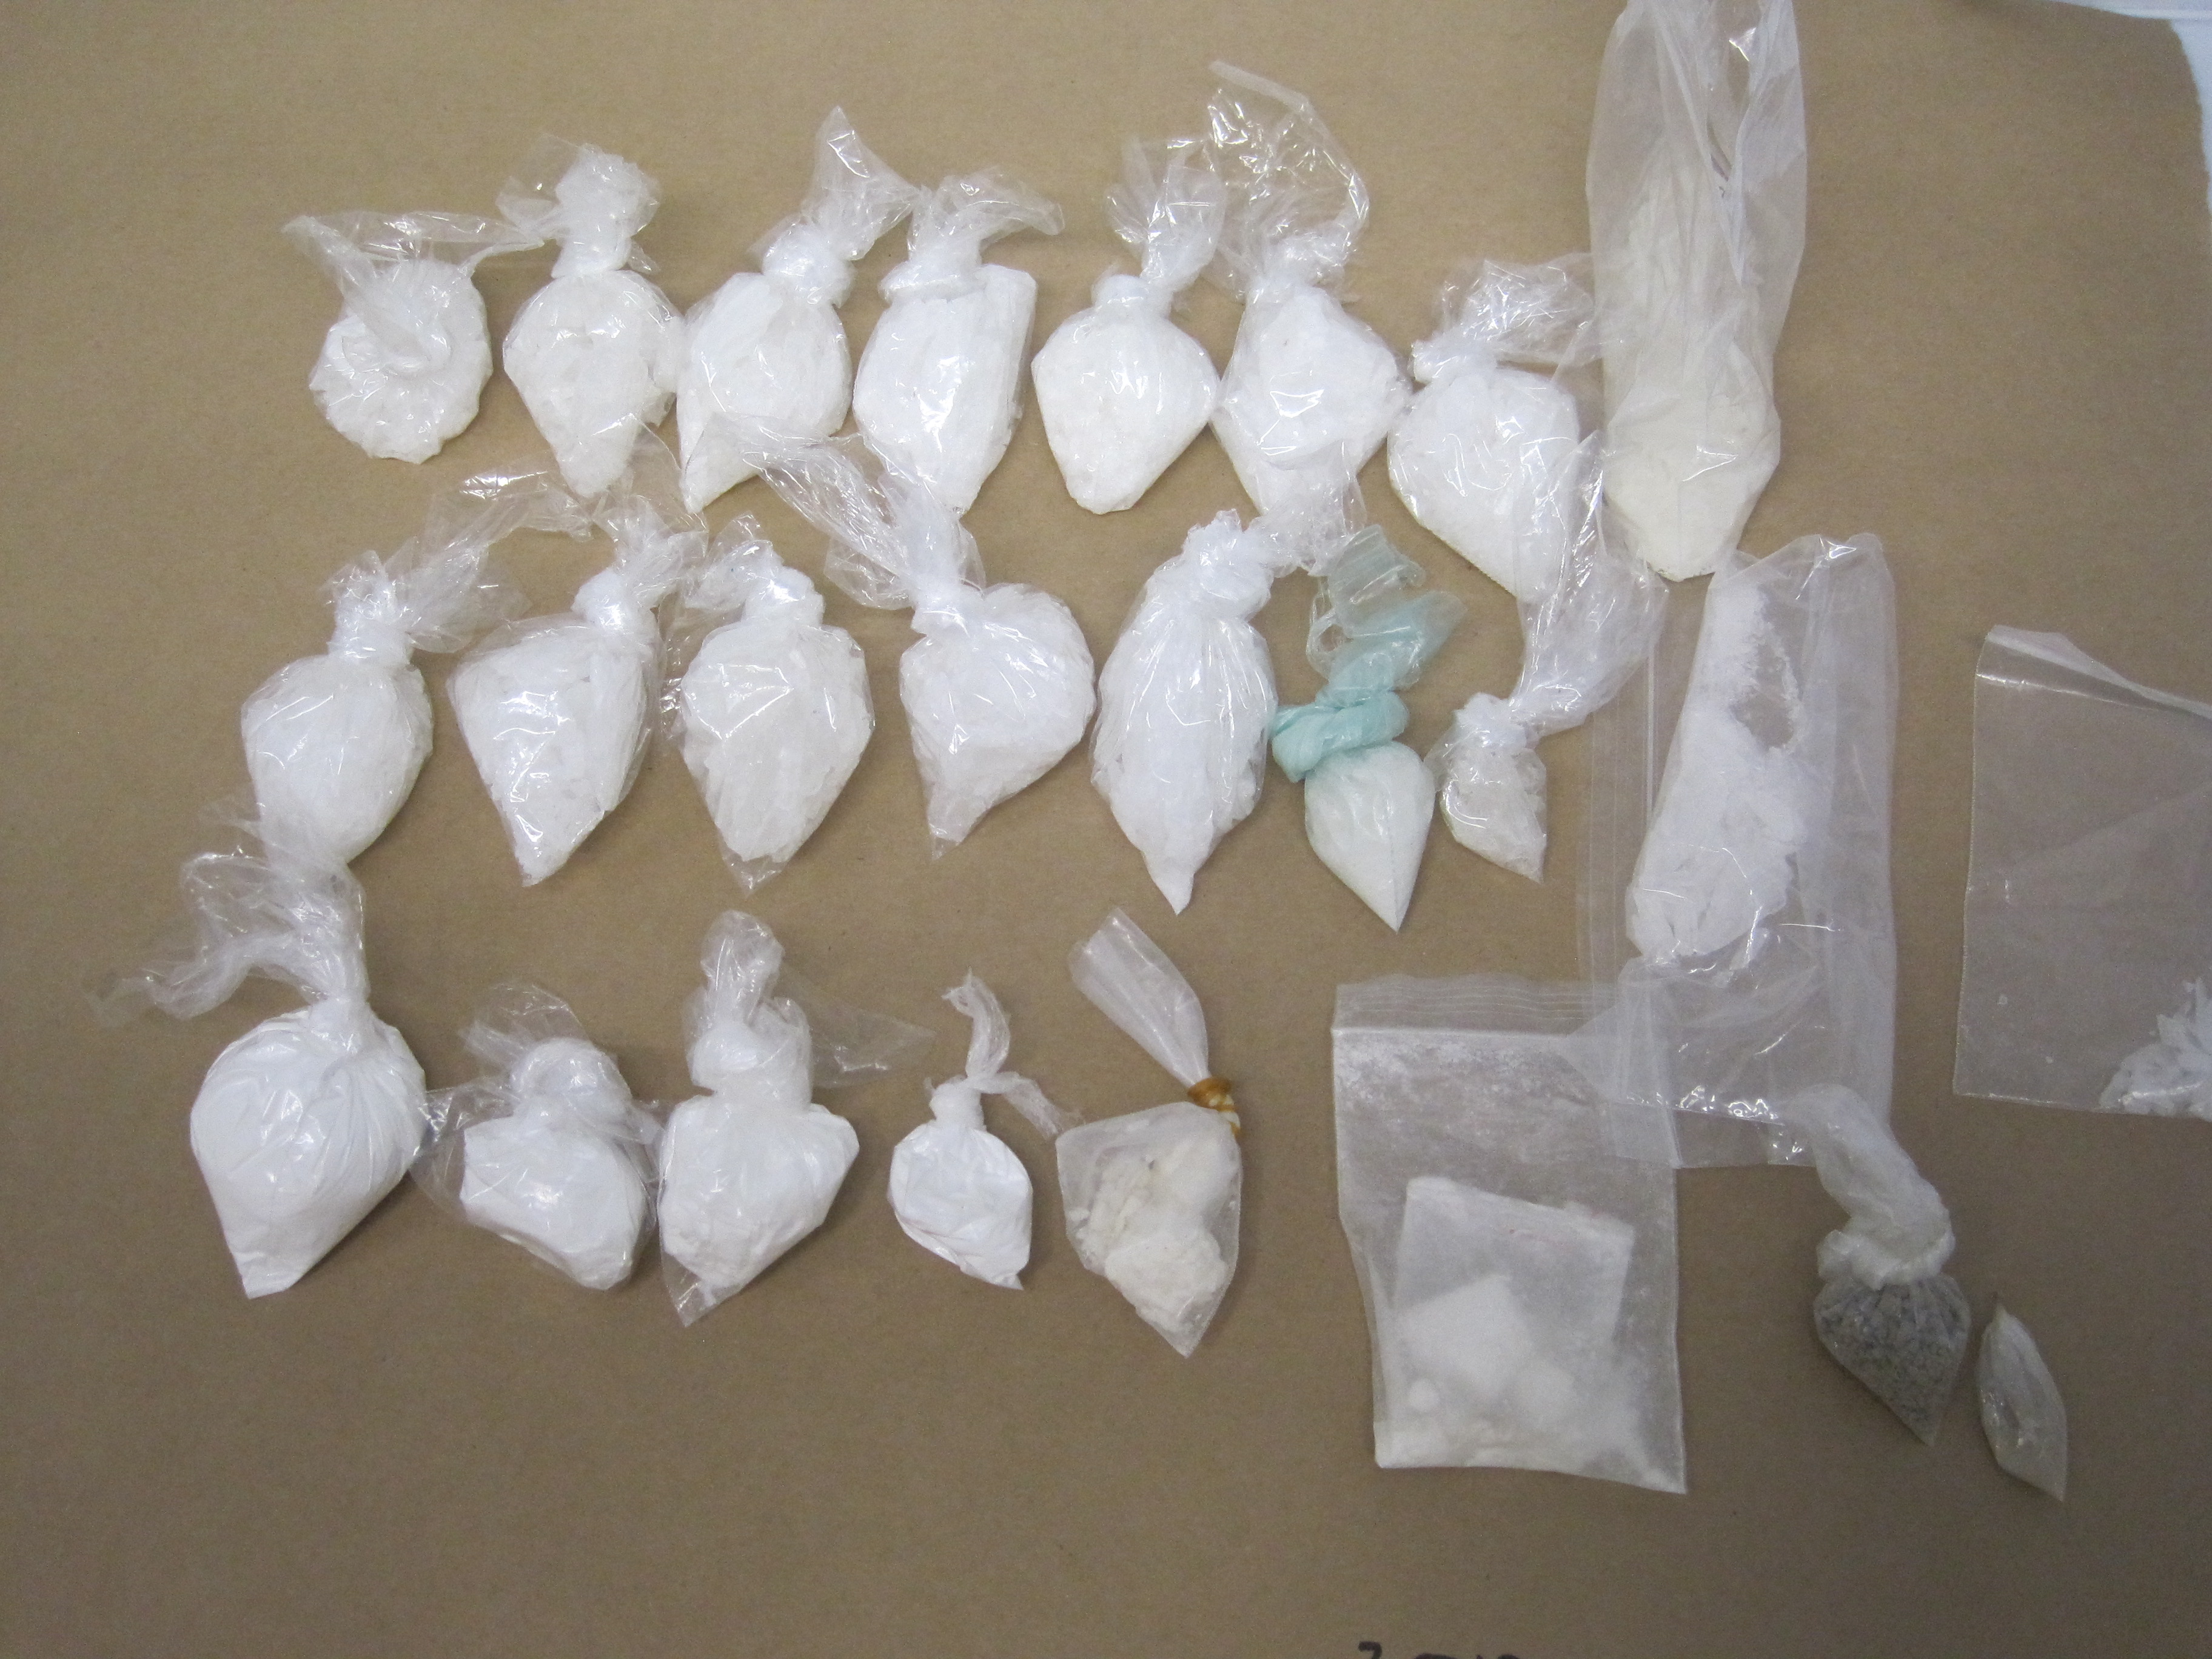 The Surrey RCMP are investigating a possible fentanyl packing site